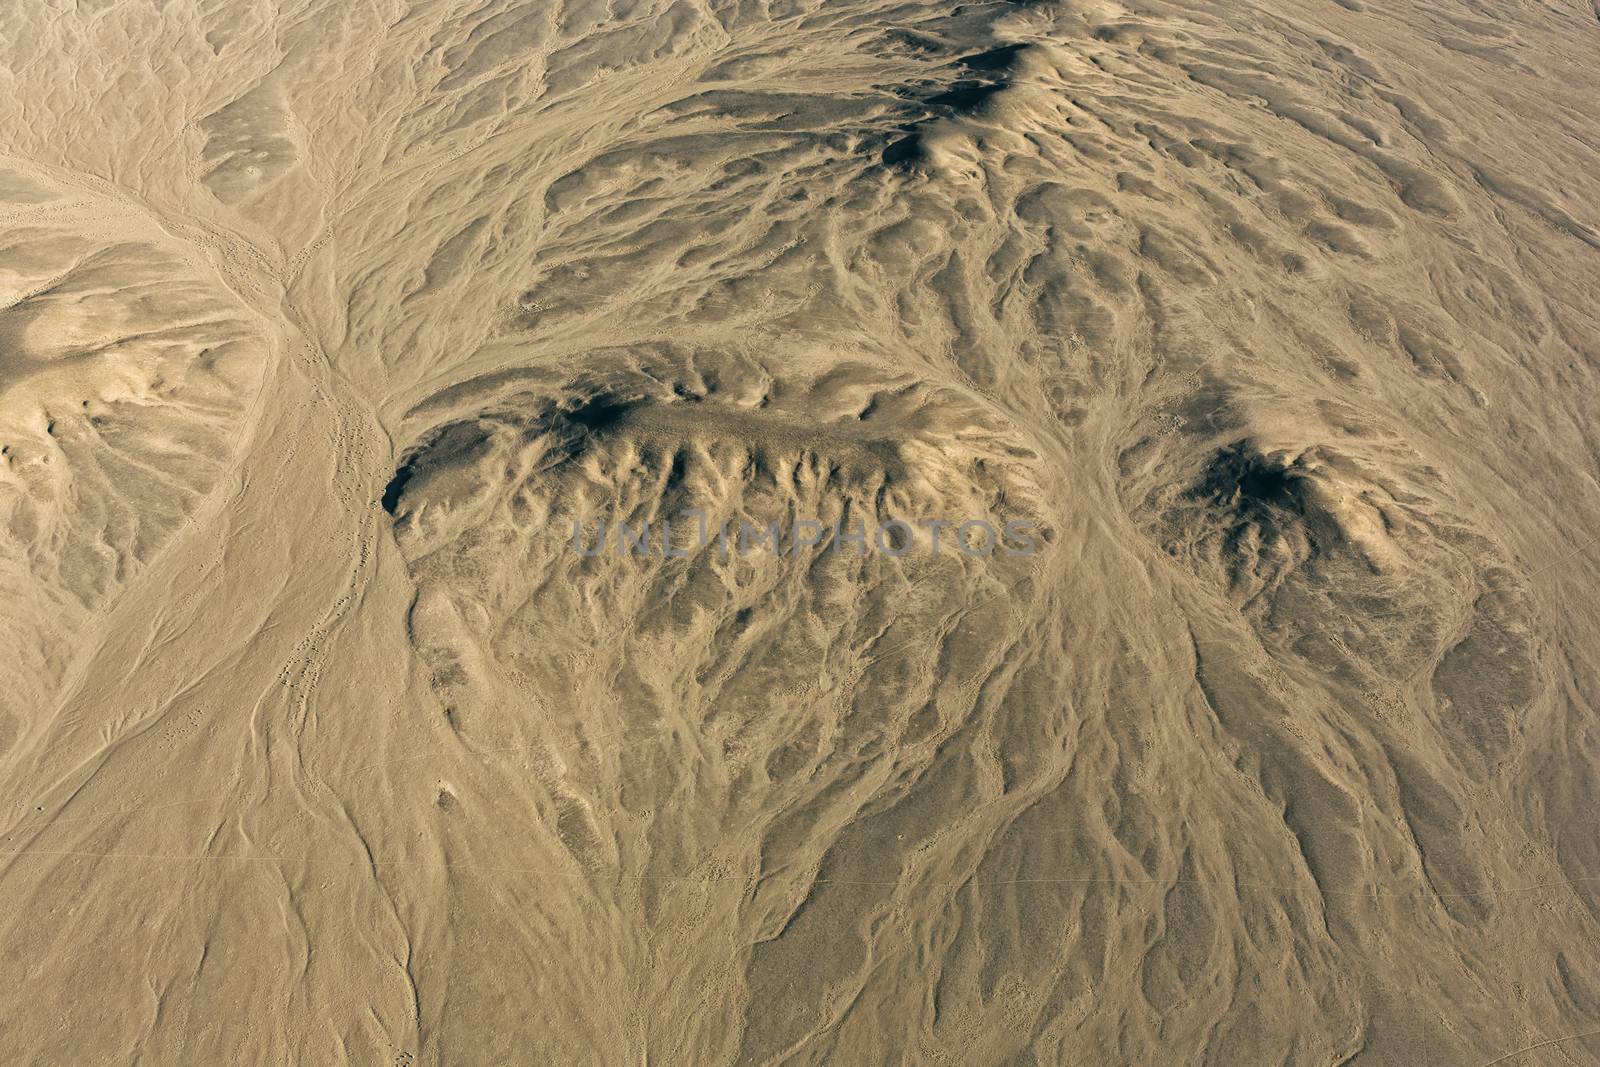 Mountains near Sossusvlei from Balloon aerial view in Namibia